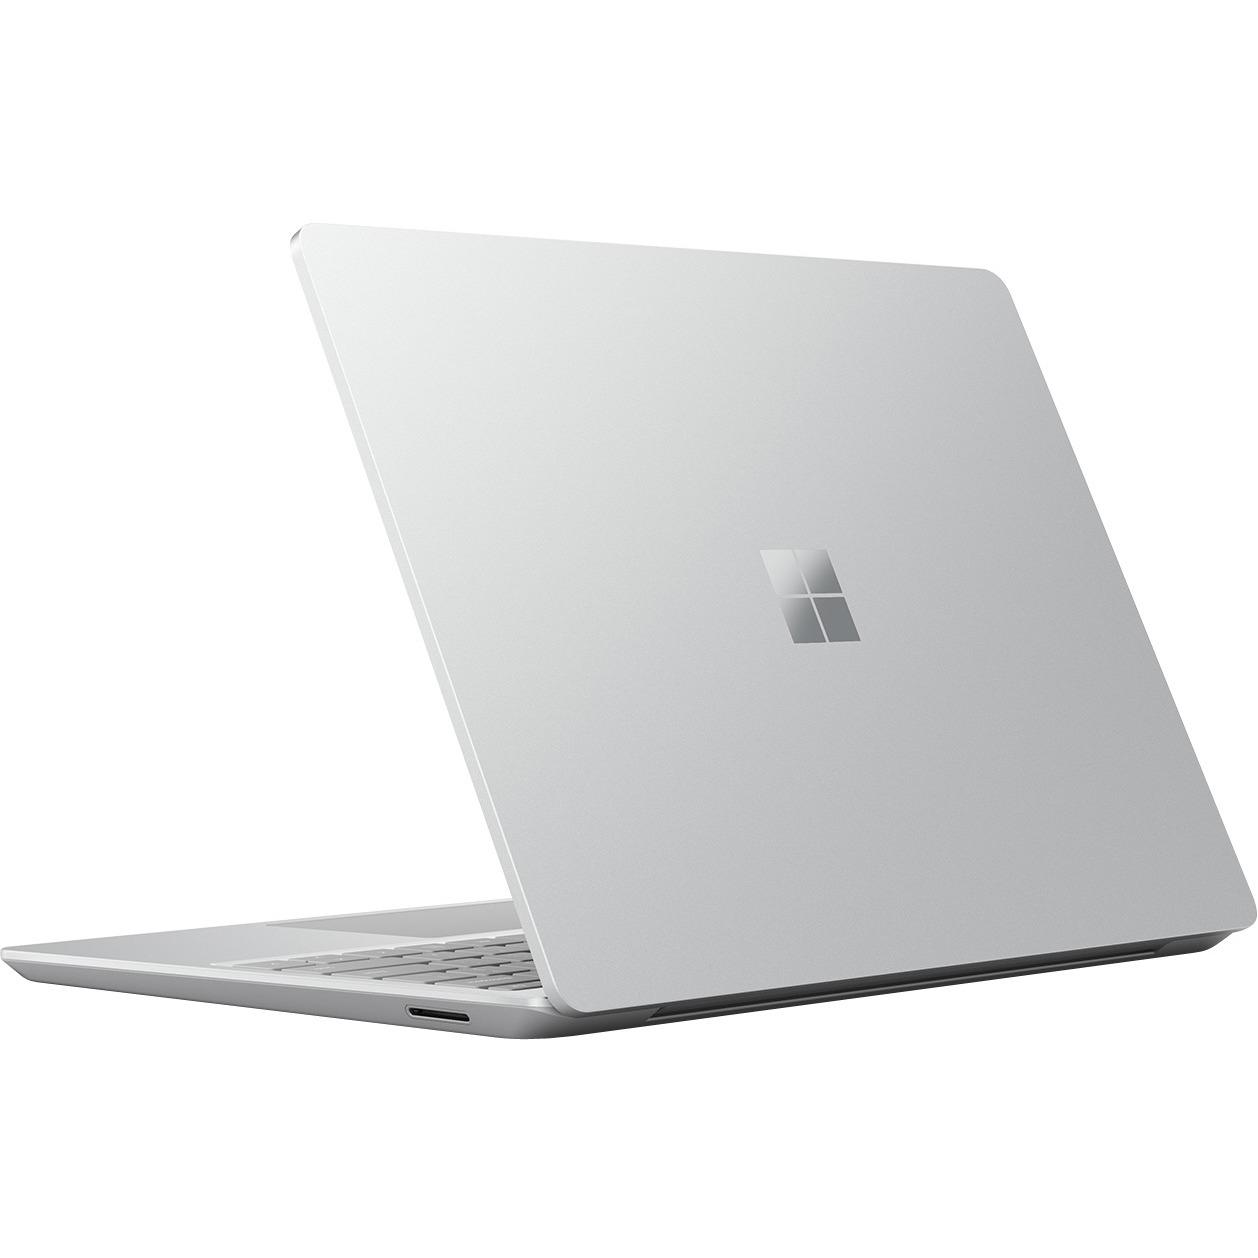 Microsoft Surface Laptop GO 1ZO-00001 12.4" Touch Notebook Intel Core i5 4GB Memory 64GB eMMC - image 3 of 3